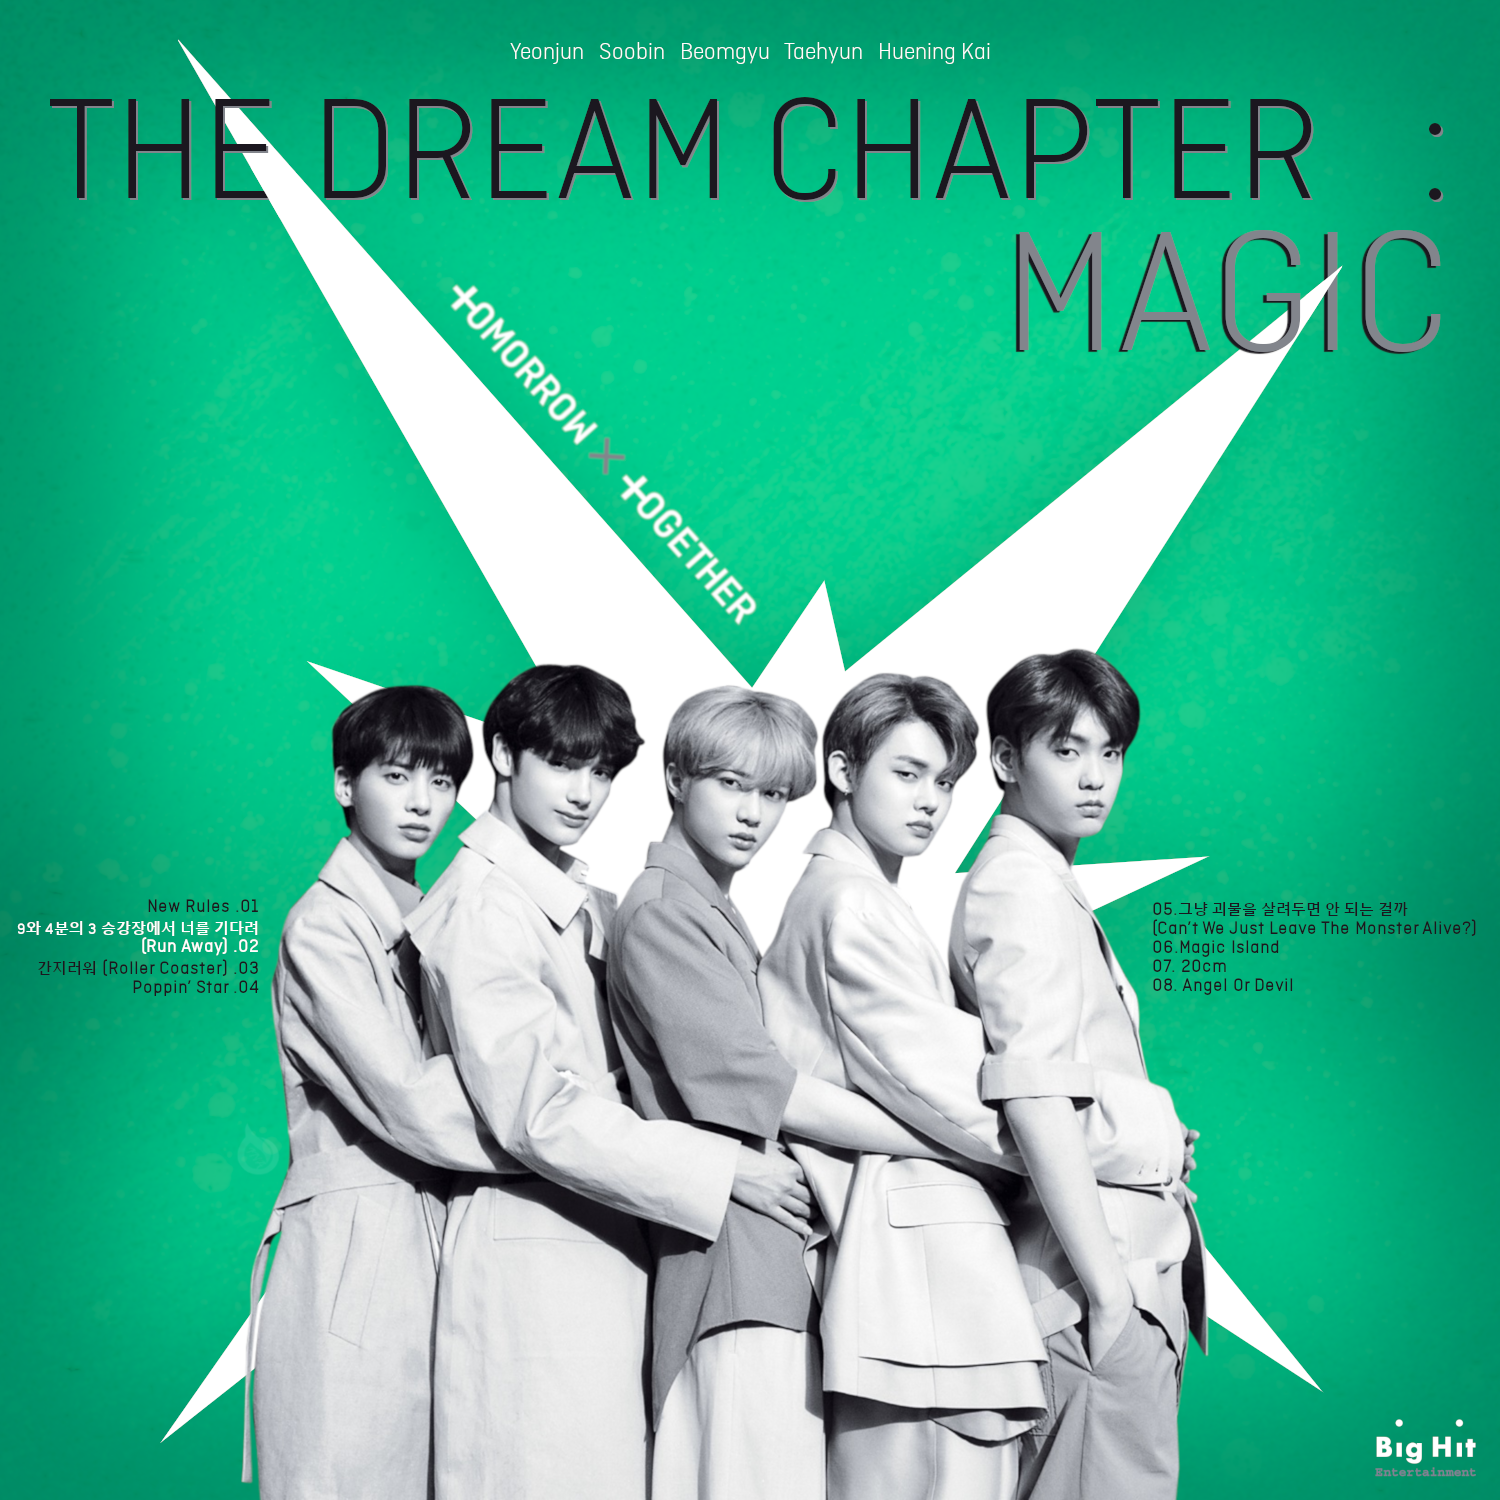 Альбом New Rules txt. The Dream Chapter: Magic. The Dream Chapter: Magic txt альбом купить. Album Art the Dream Chapter: Magic New Rules.